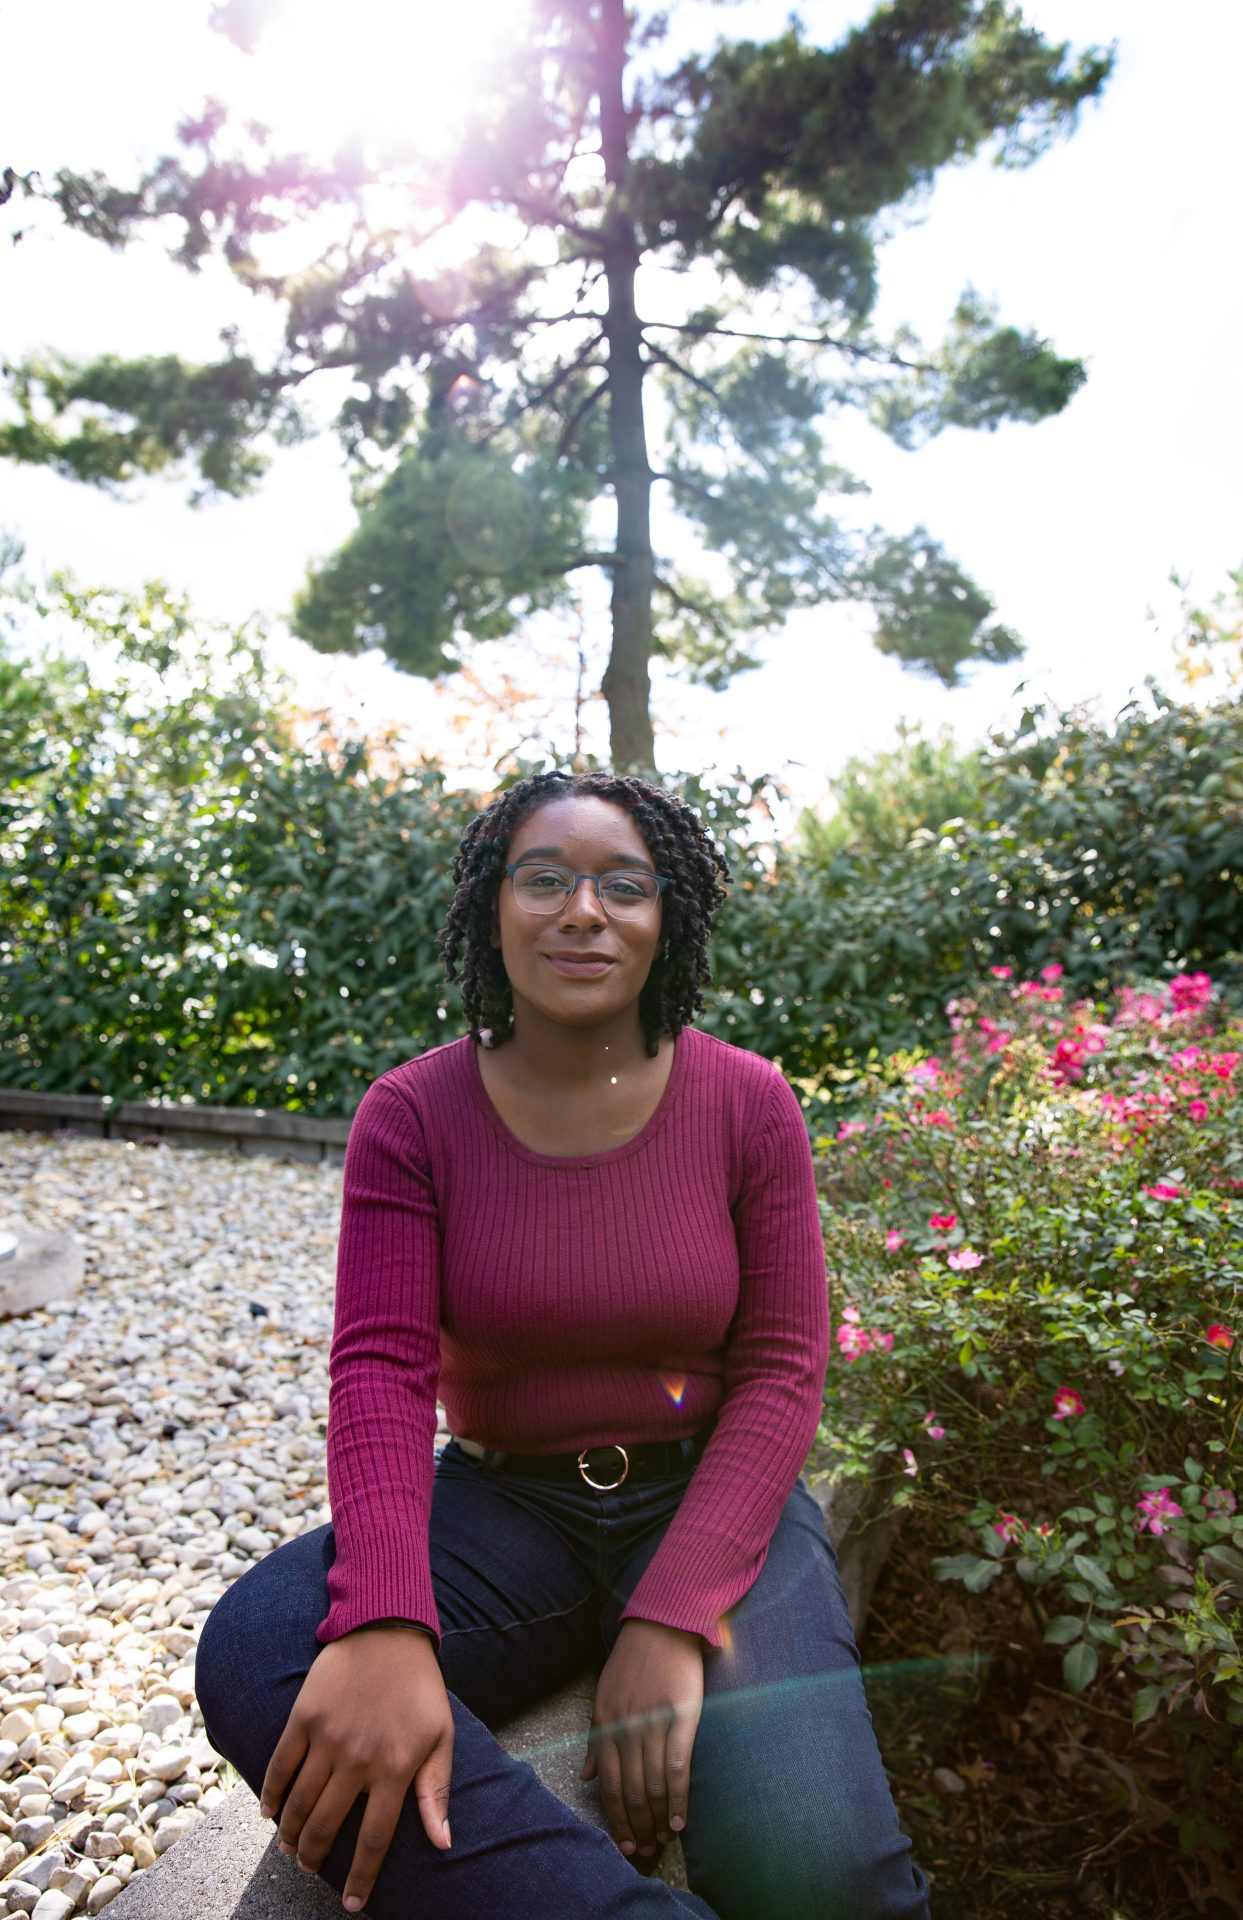 Higher Education Administration track graduate student Jessica Hassell sits near a bush on Rowan University's campus.